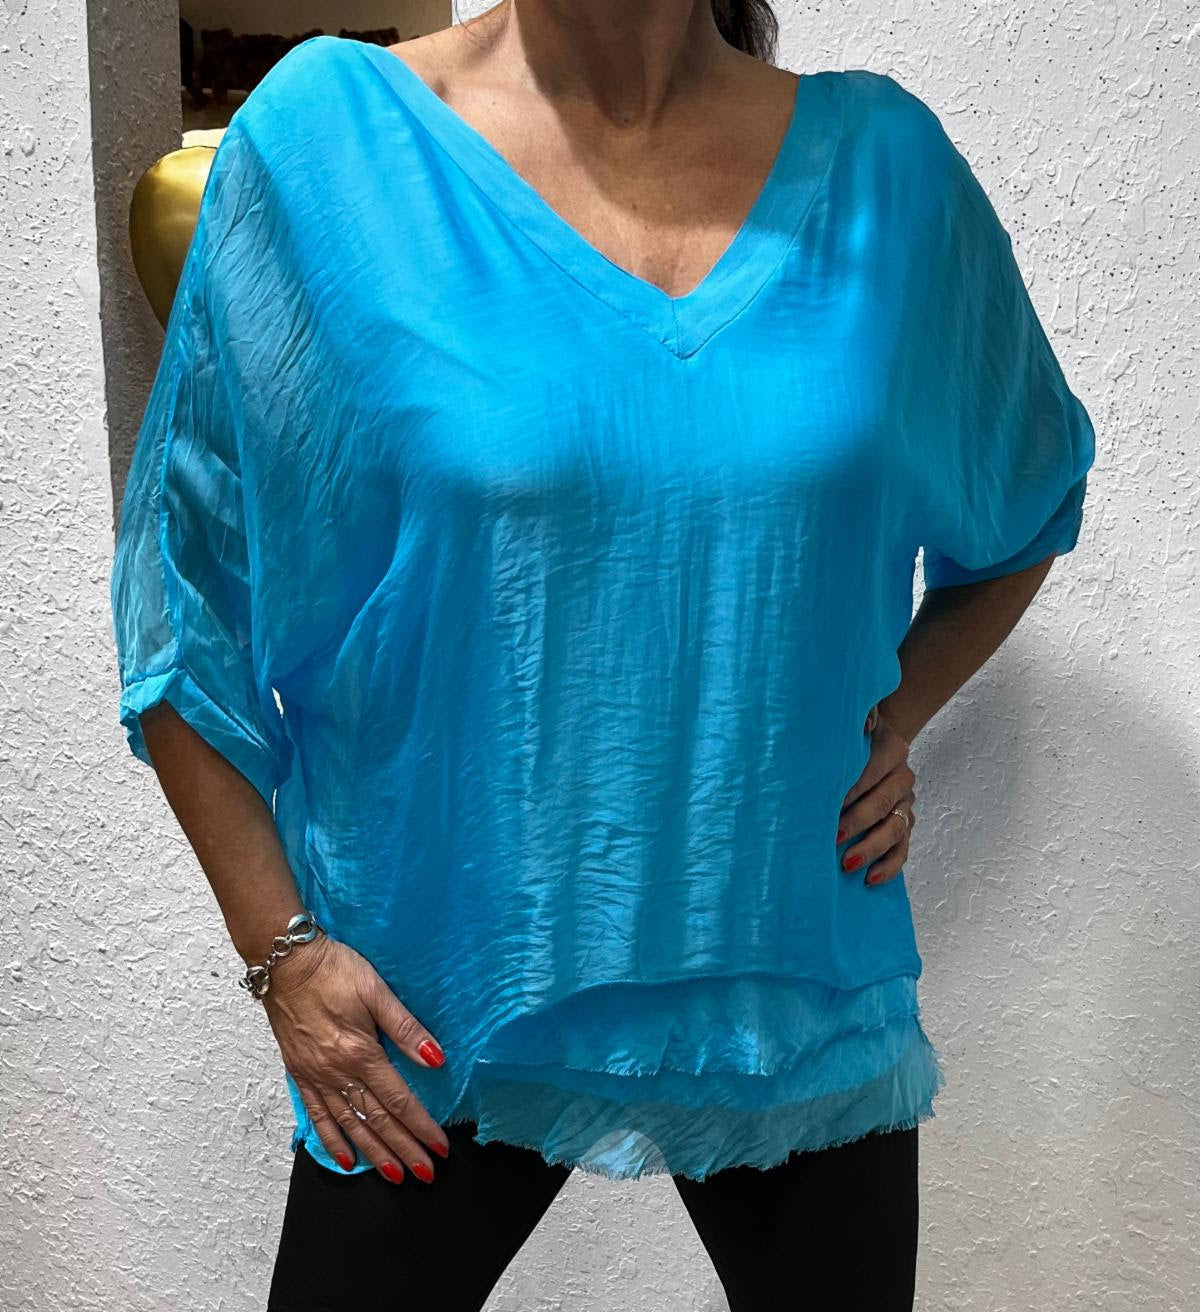 Added Touch "Select" Flattering Layered Style V-Neck -Turquoise